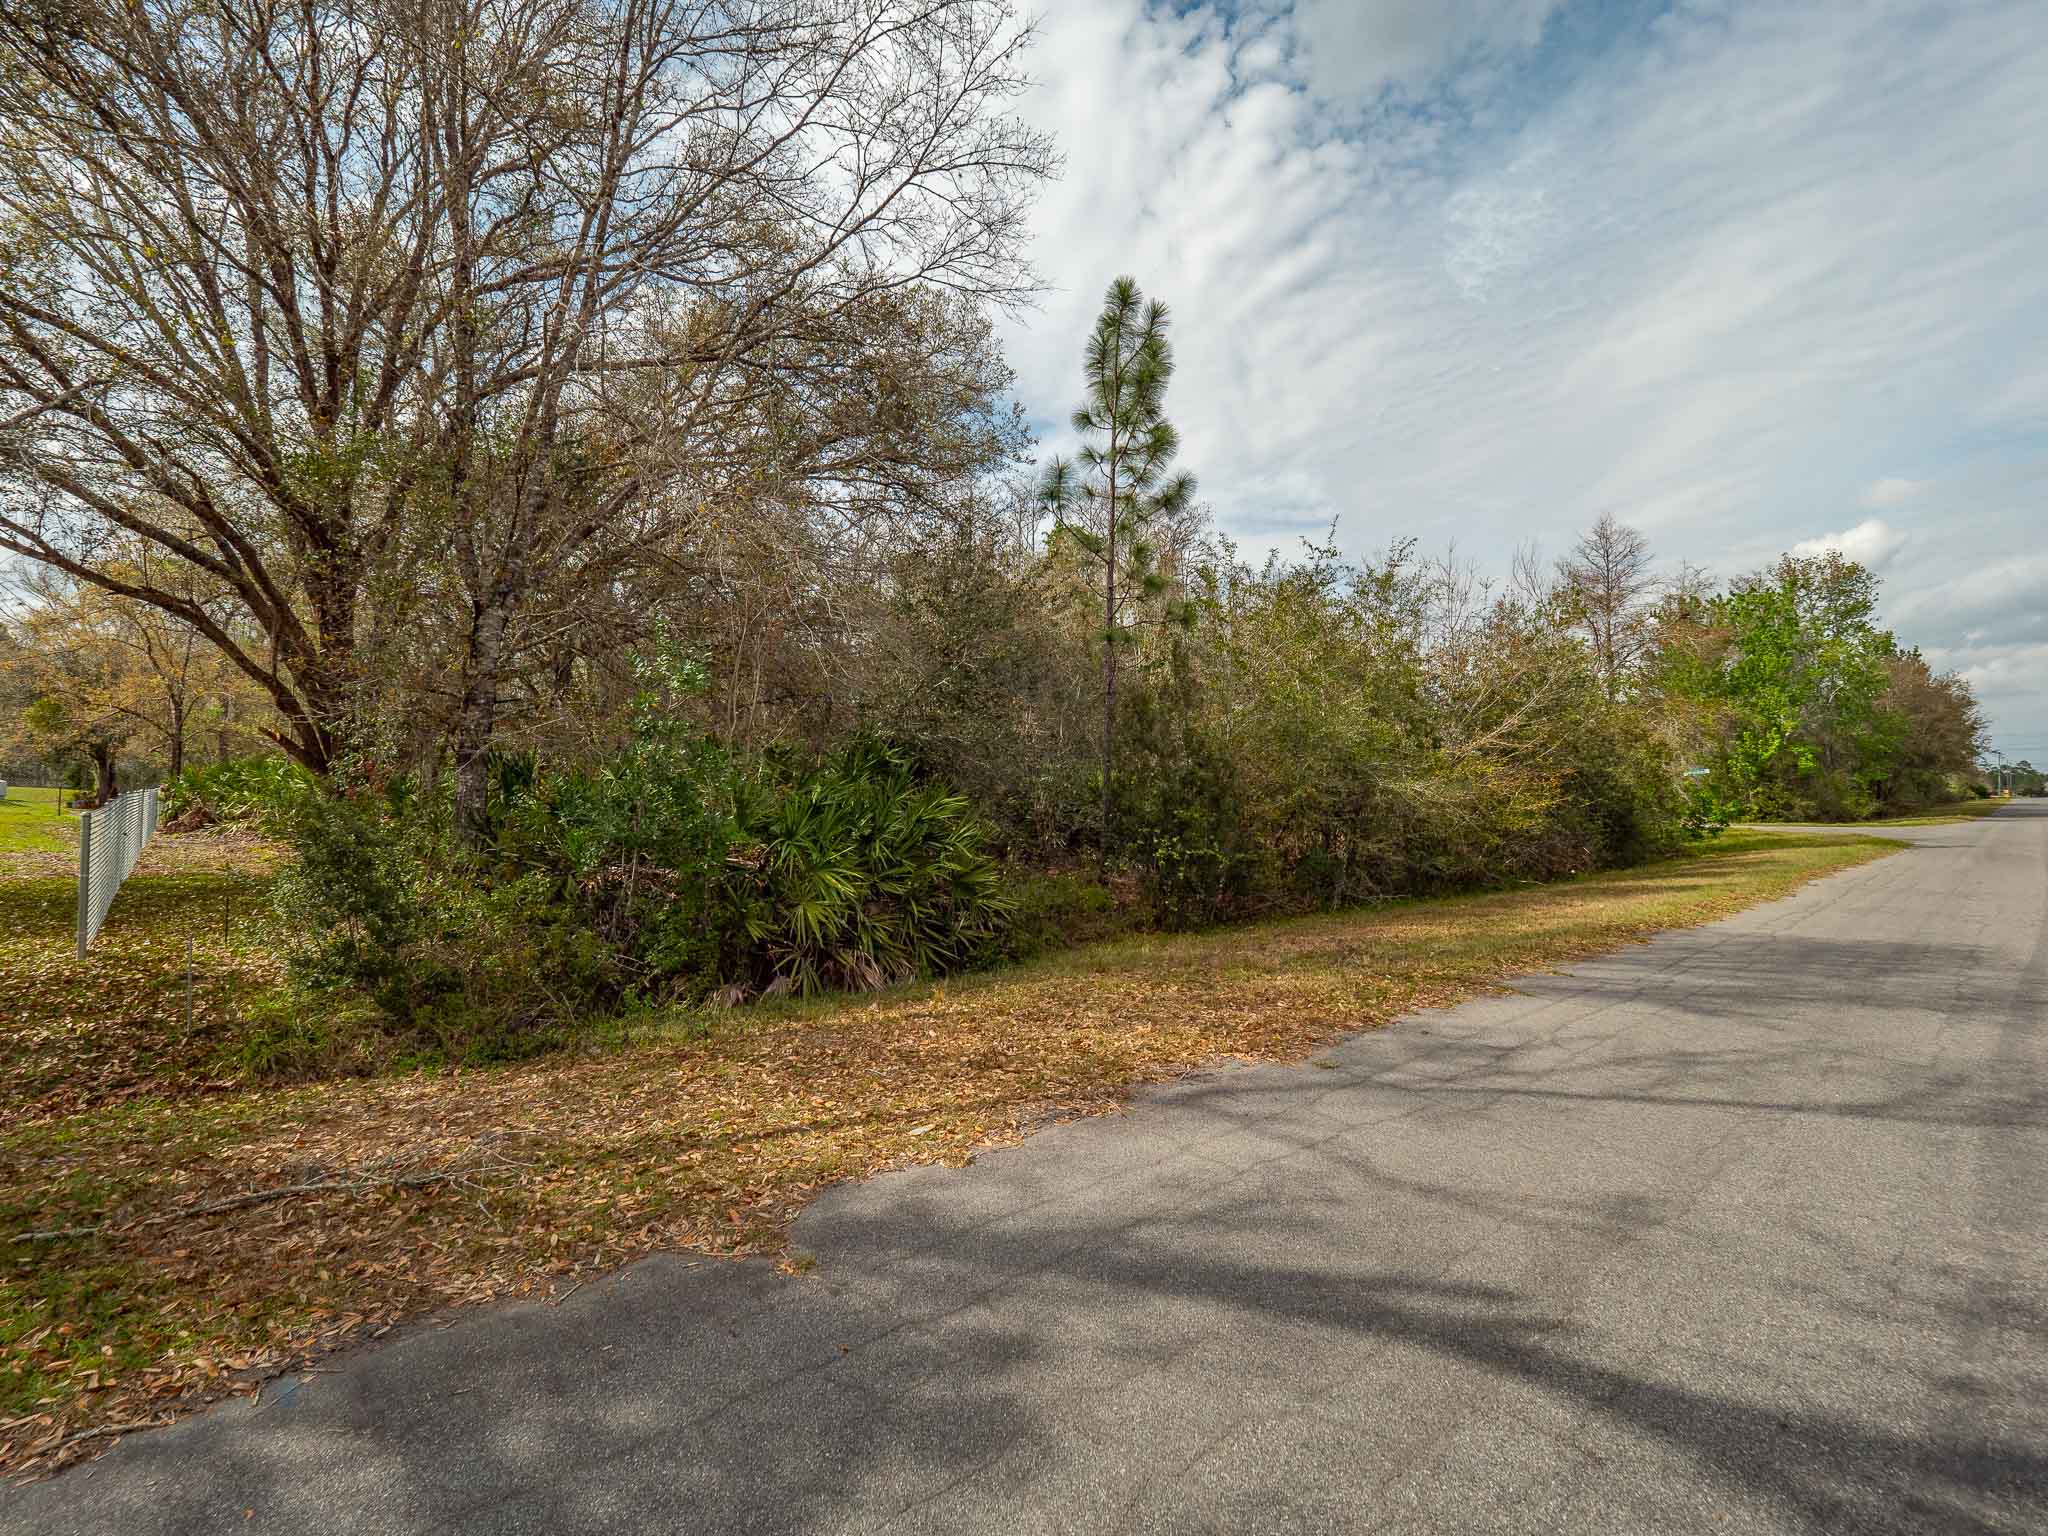  Cavalier Ave Parcel 10-23-32-1184-14-080, Wedgefield, FL 32833, US Photo 17